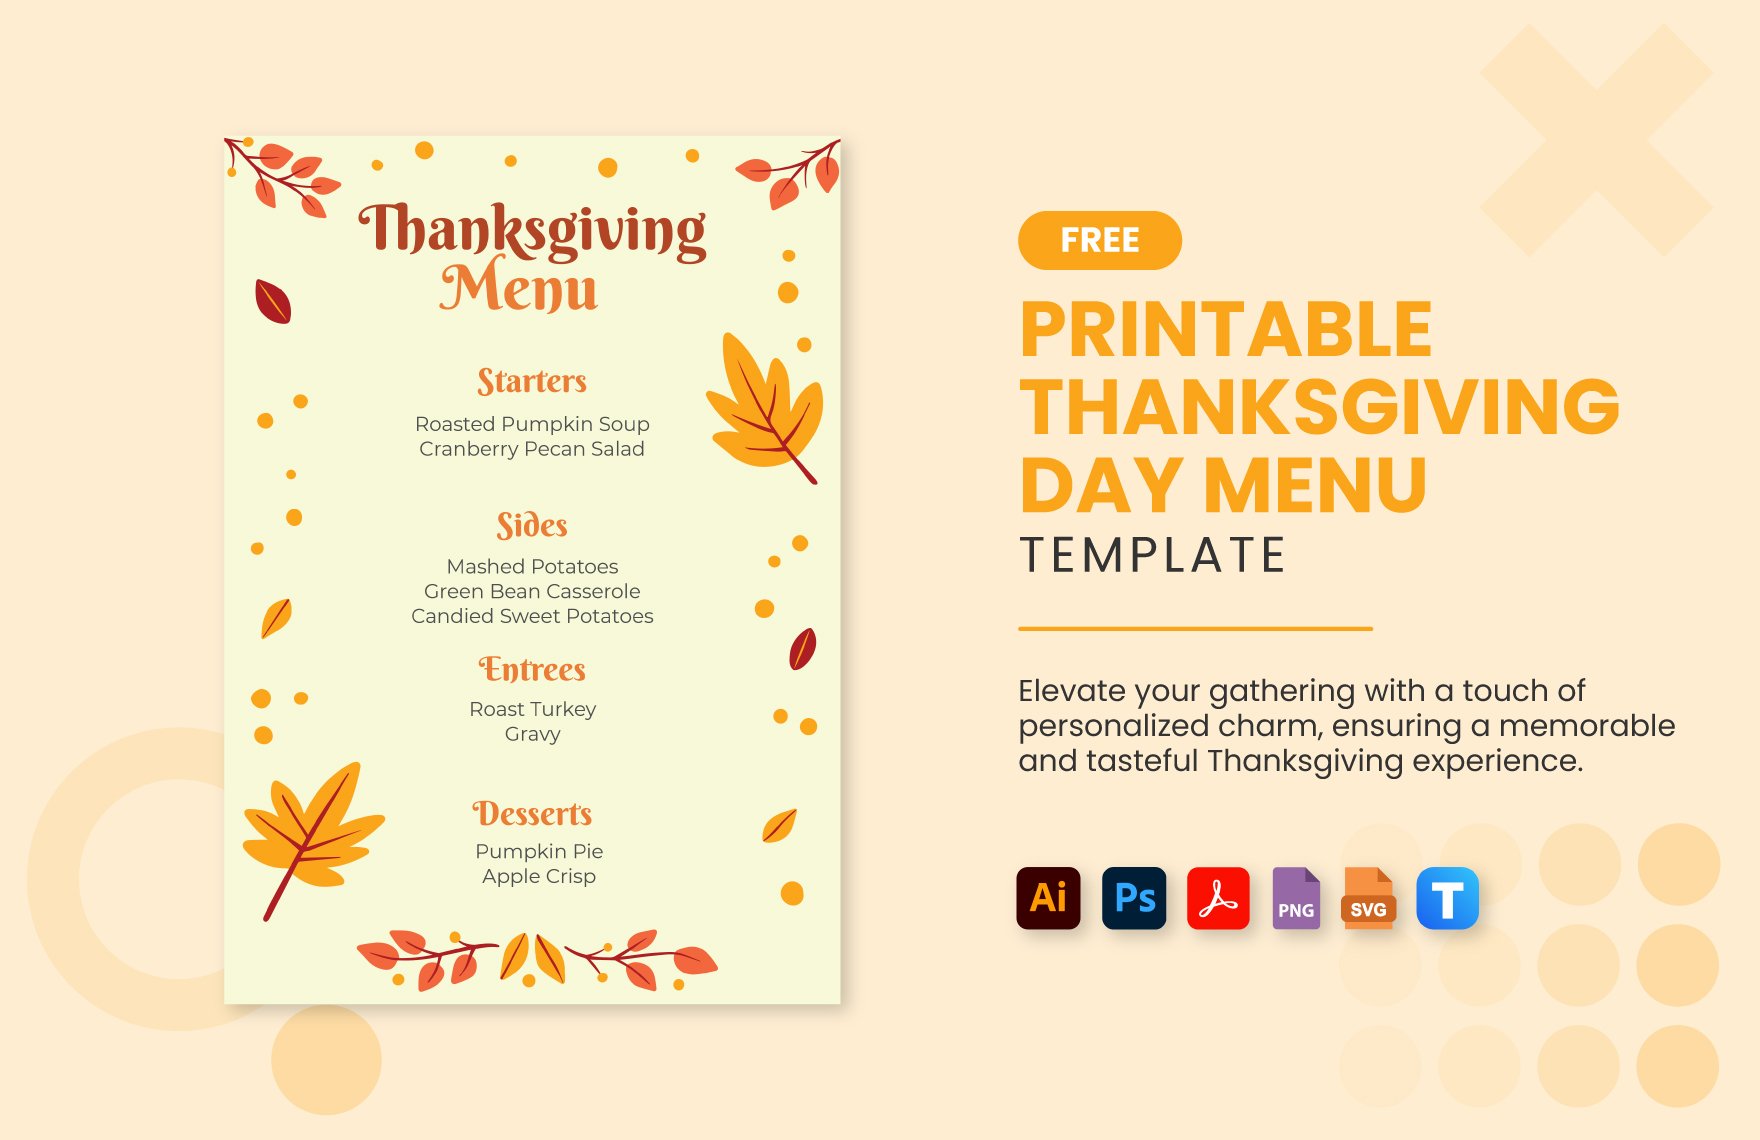 Printable Thanksgiving Menu Template in Pages, Publisher, Photoshop ...